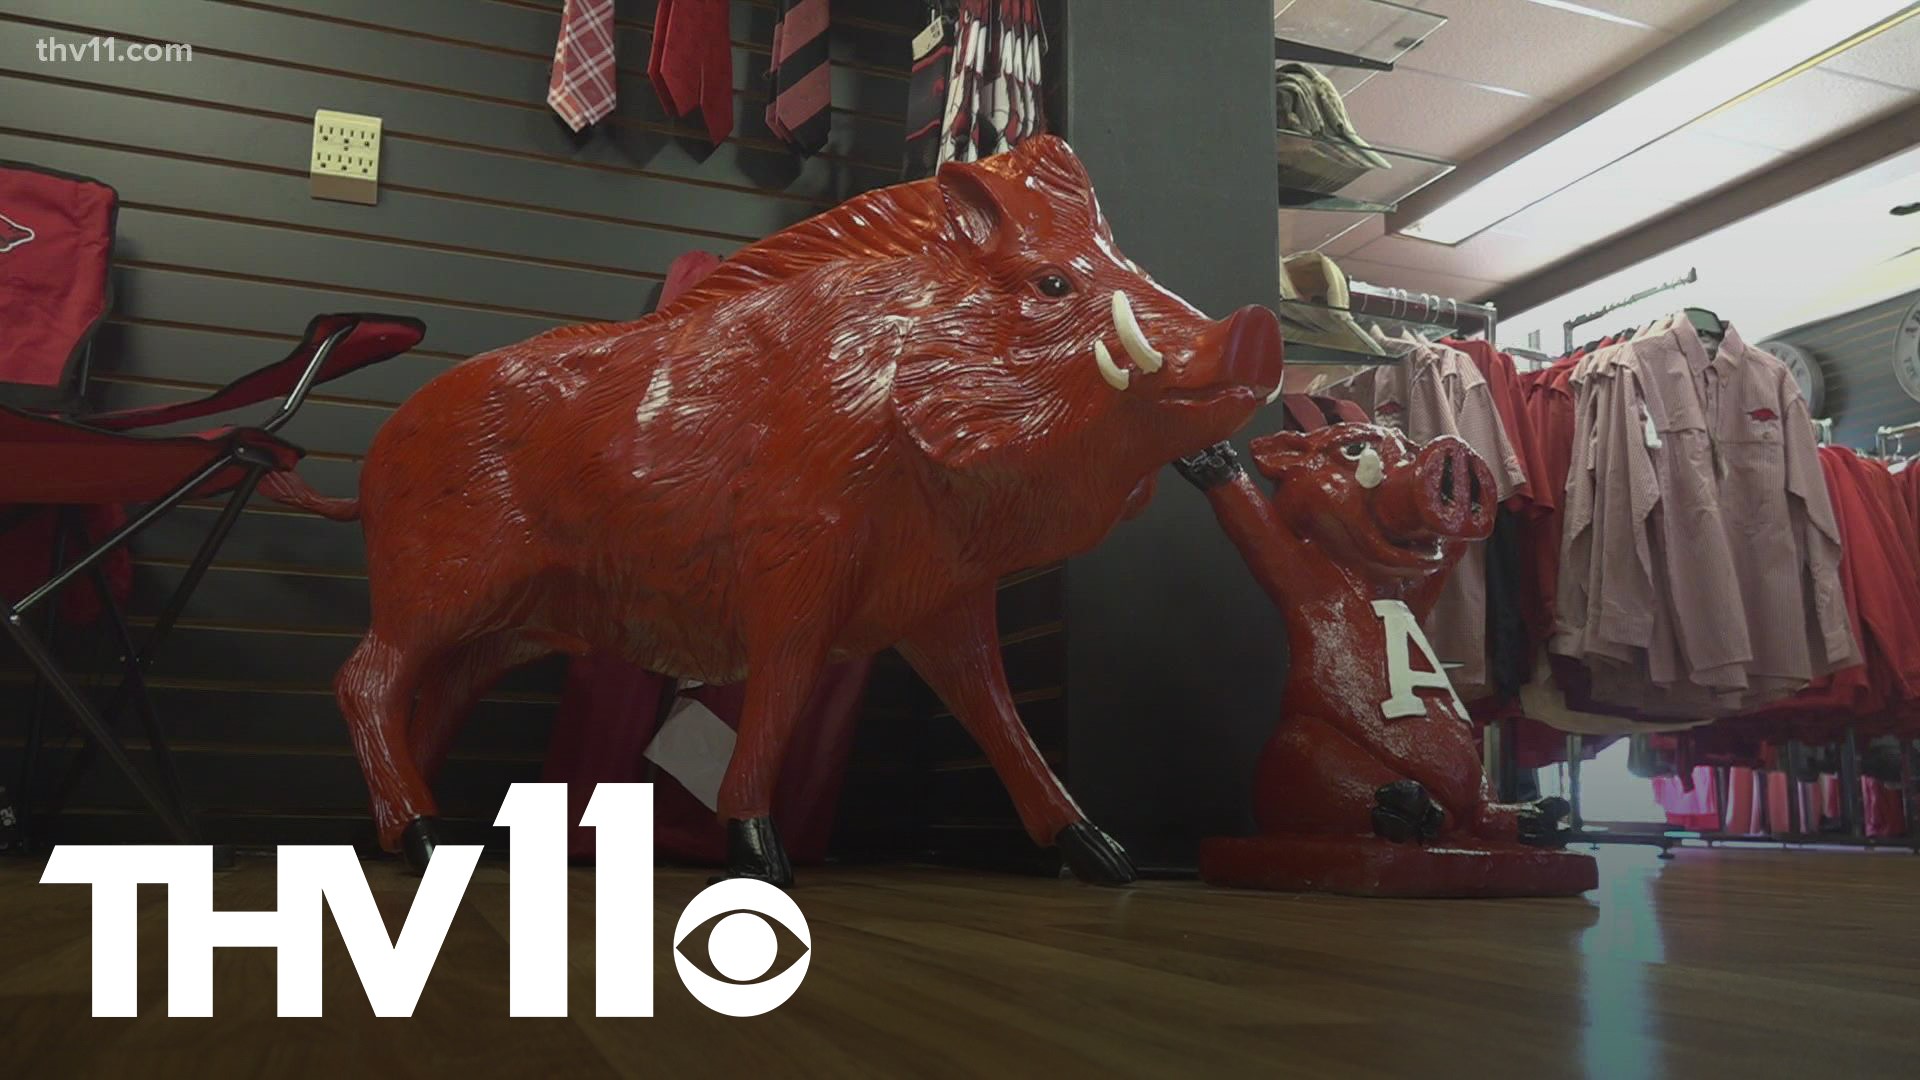 Saturday, tens of thousands of fans will gather in Fayetteville for a game against the Texas Longhorns. Some businesses are expecting to see fans as well.